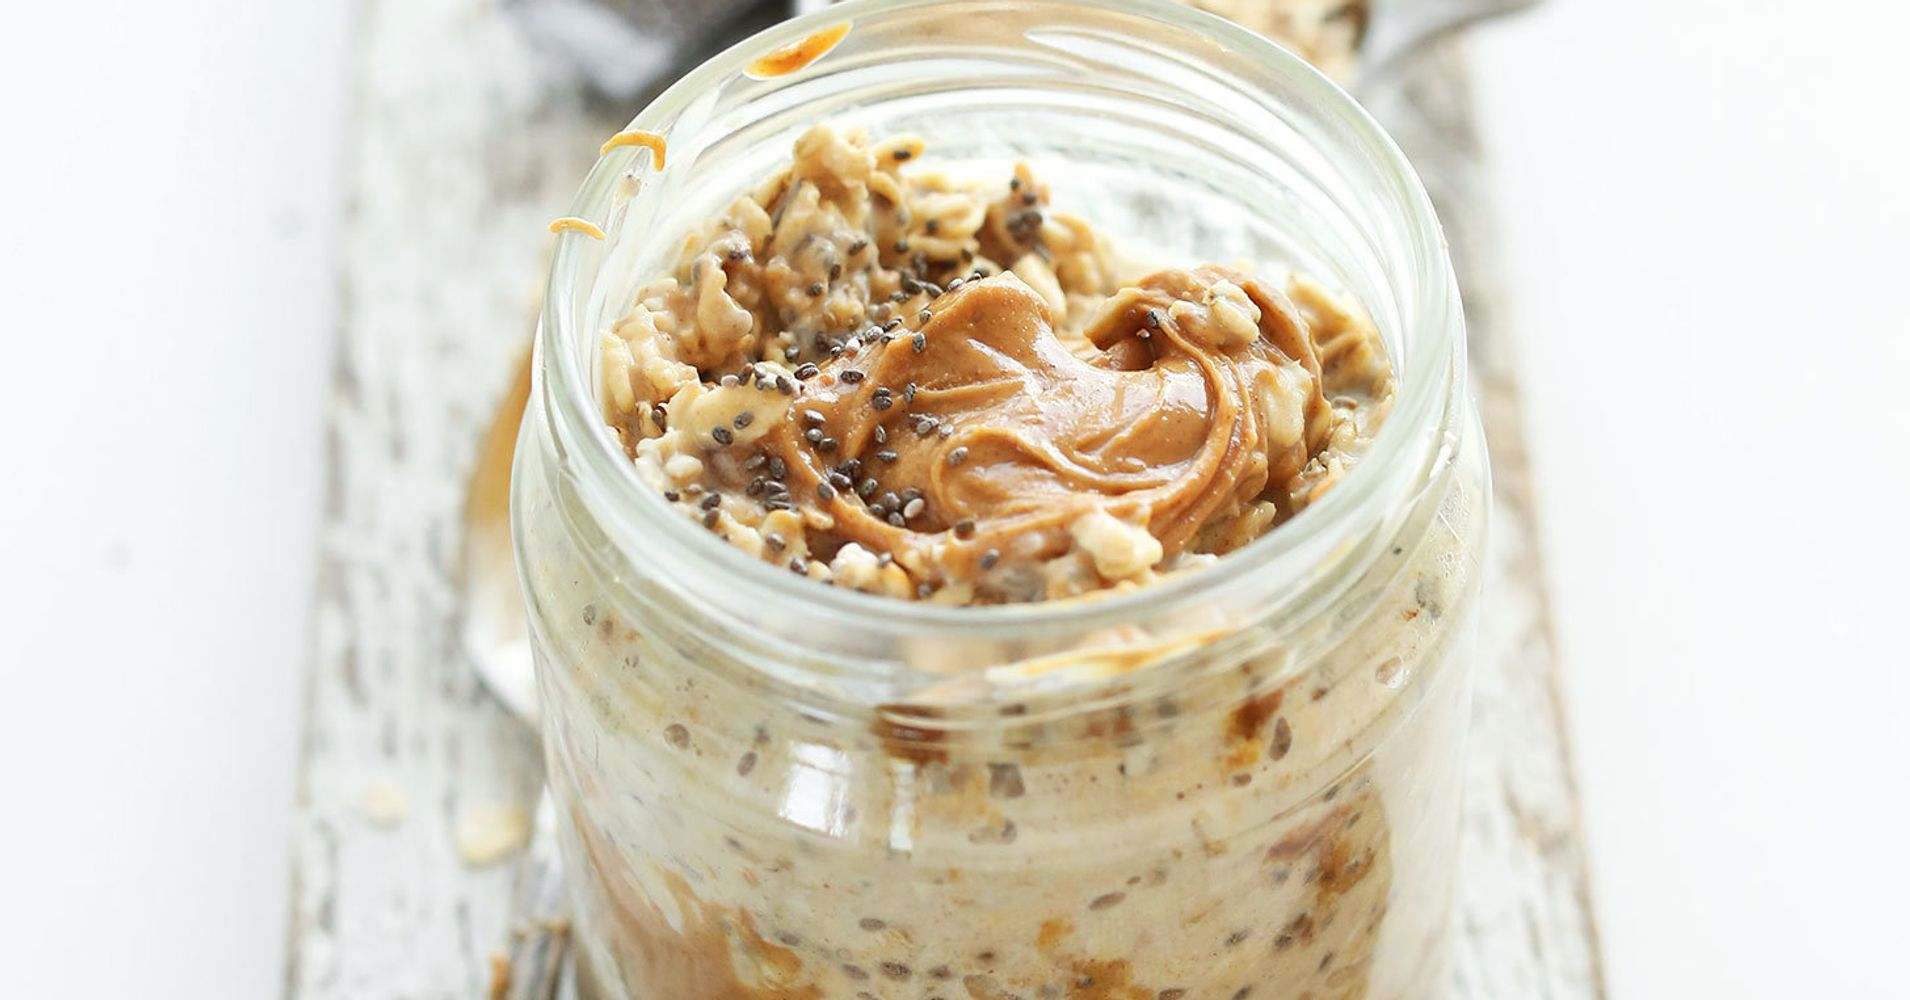 Healthy Peanut Butter Recipes That Satisfy Your Cravings | HuffPost